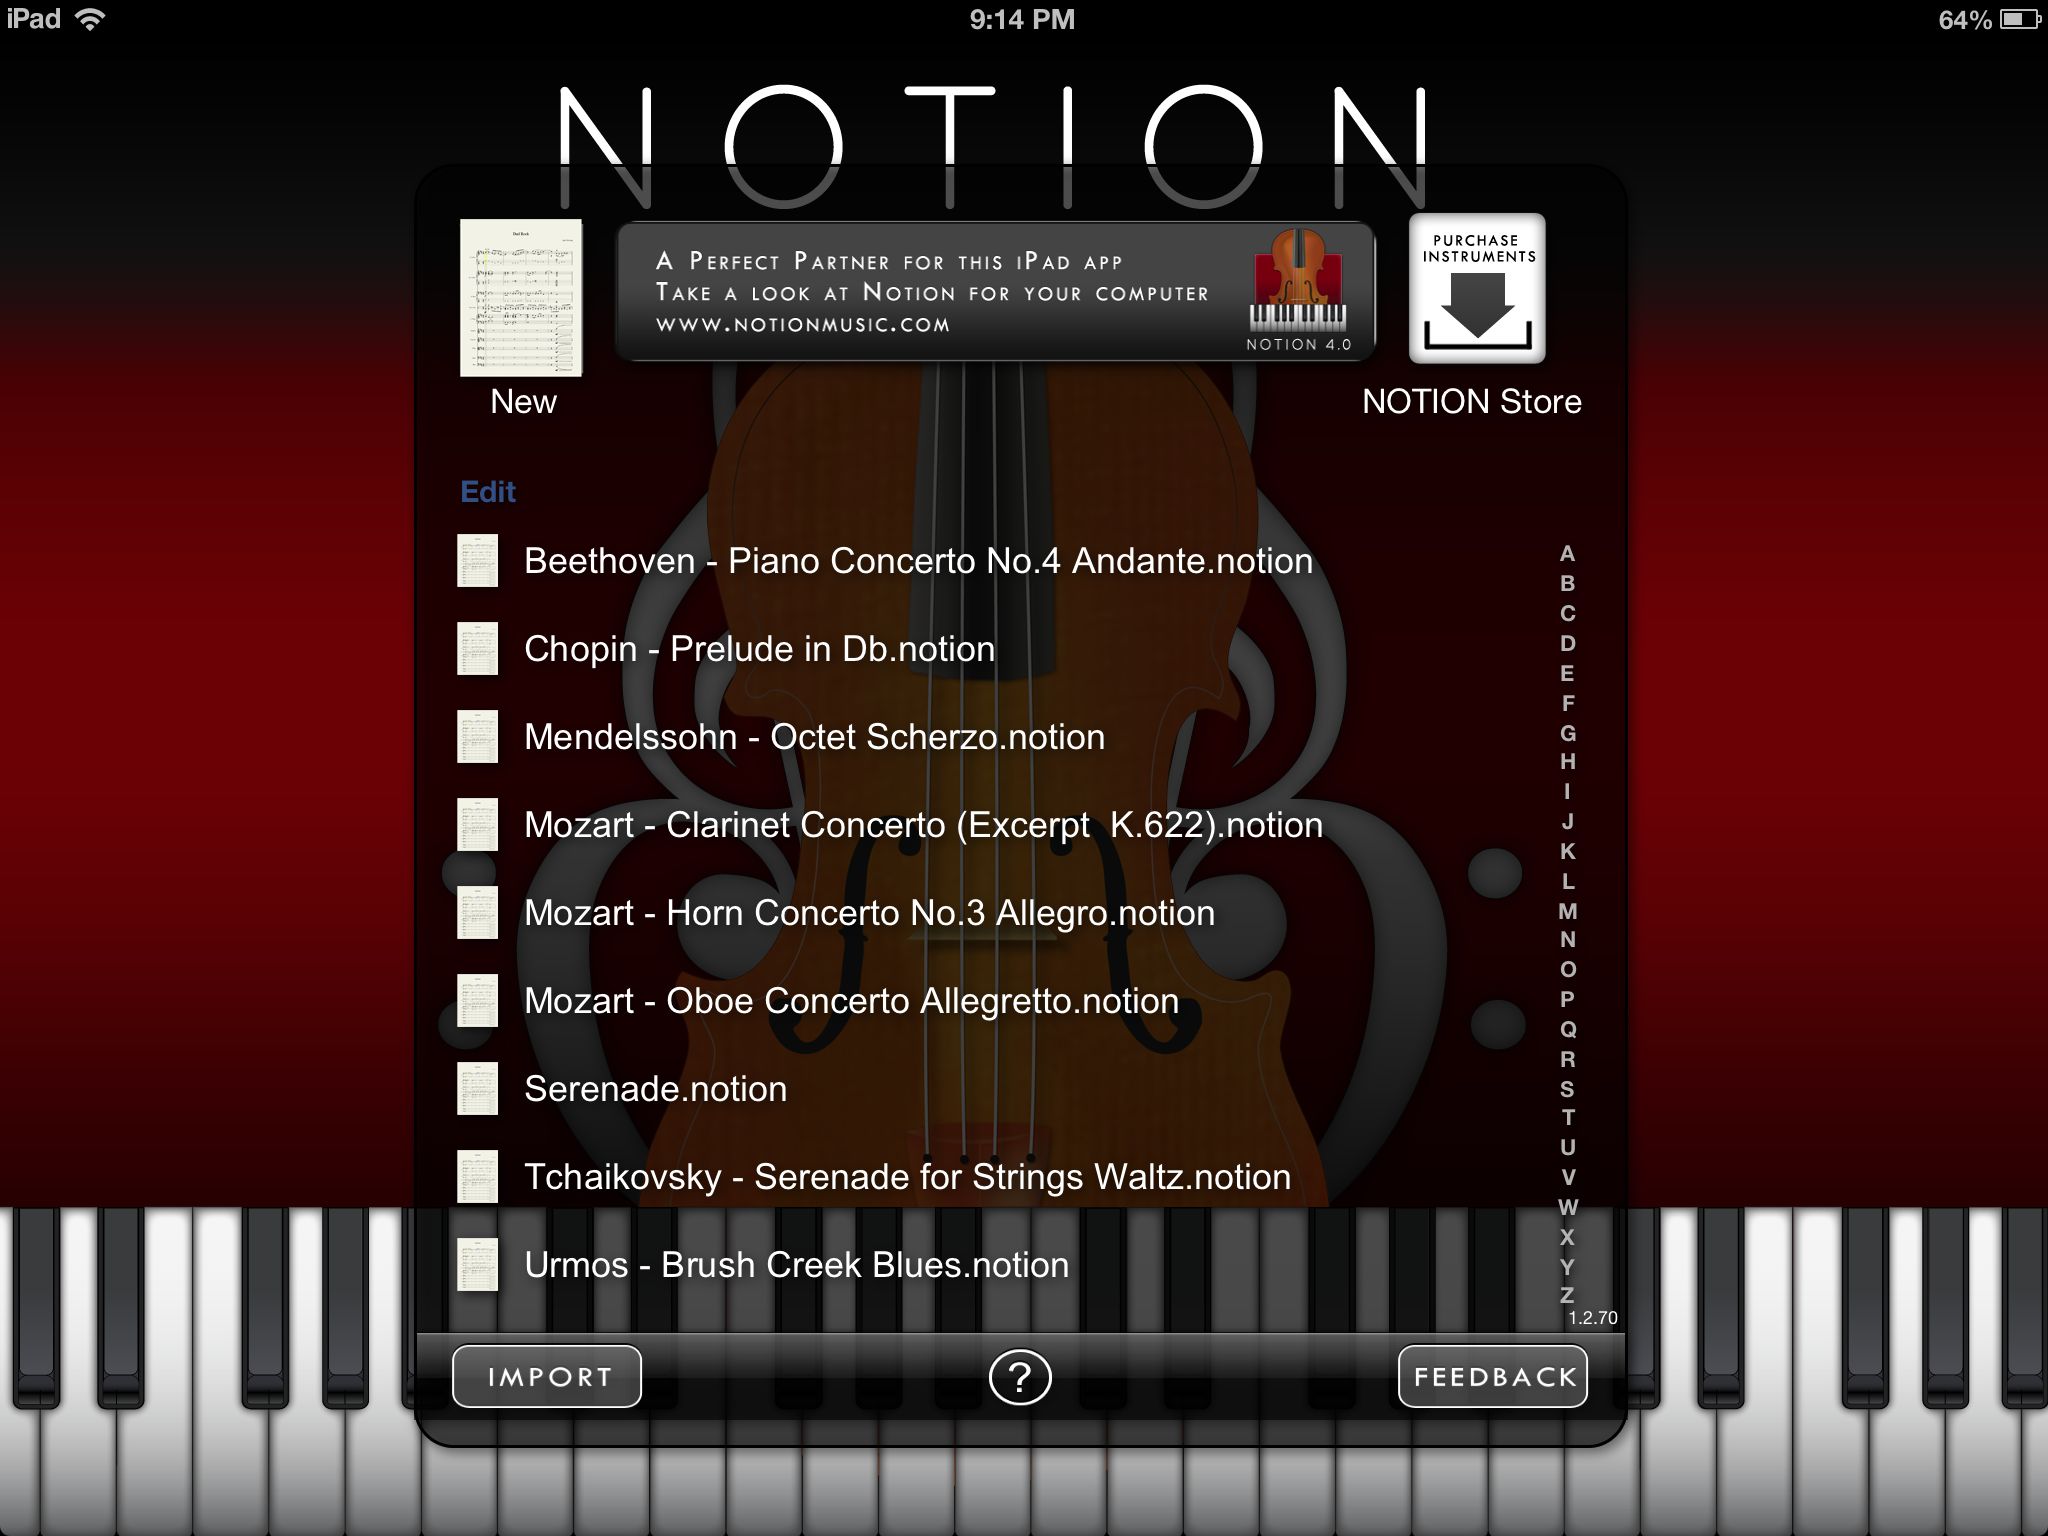 Pic 7 – Notion for iPad Score Selection.